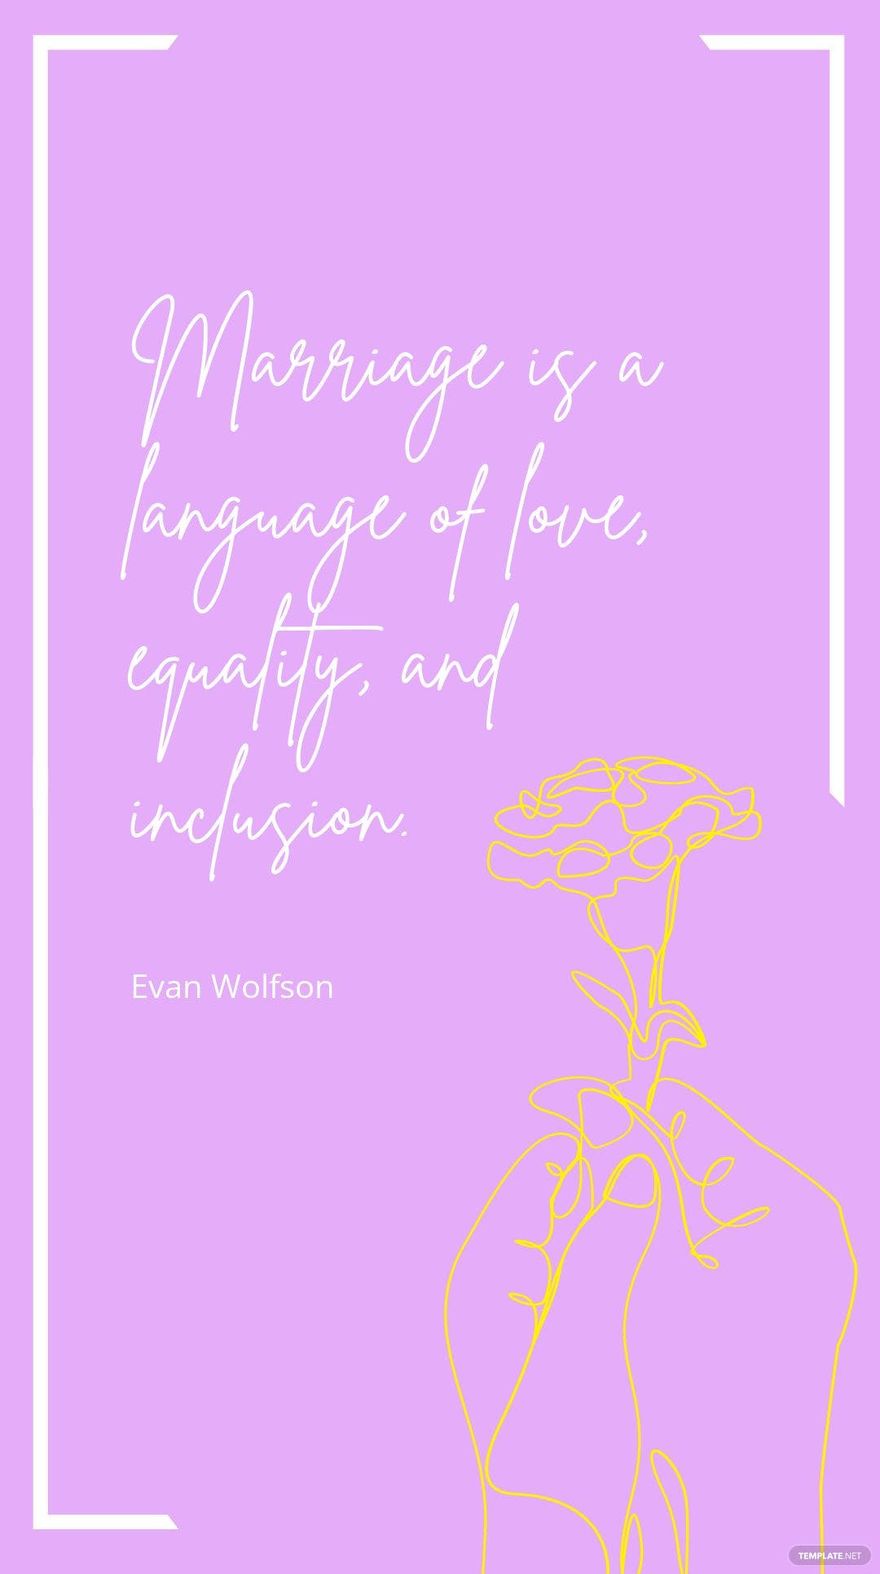 Free Evan Wolfson - Marriage is a language of love, equality, and inclusion.